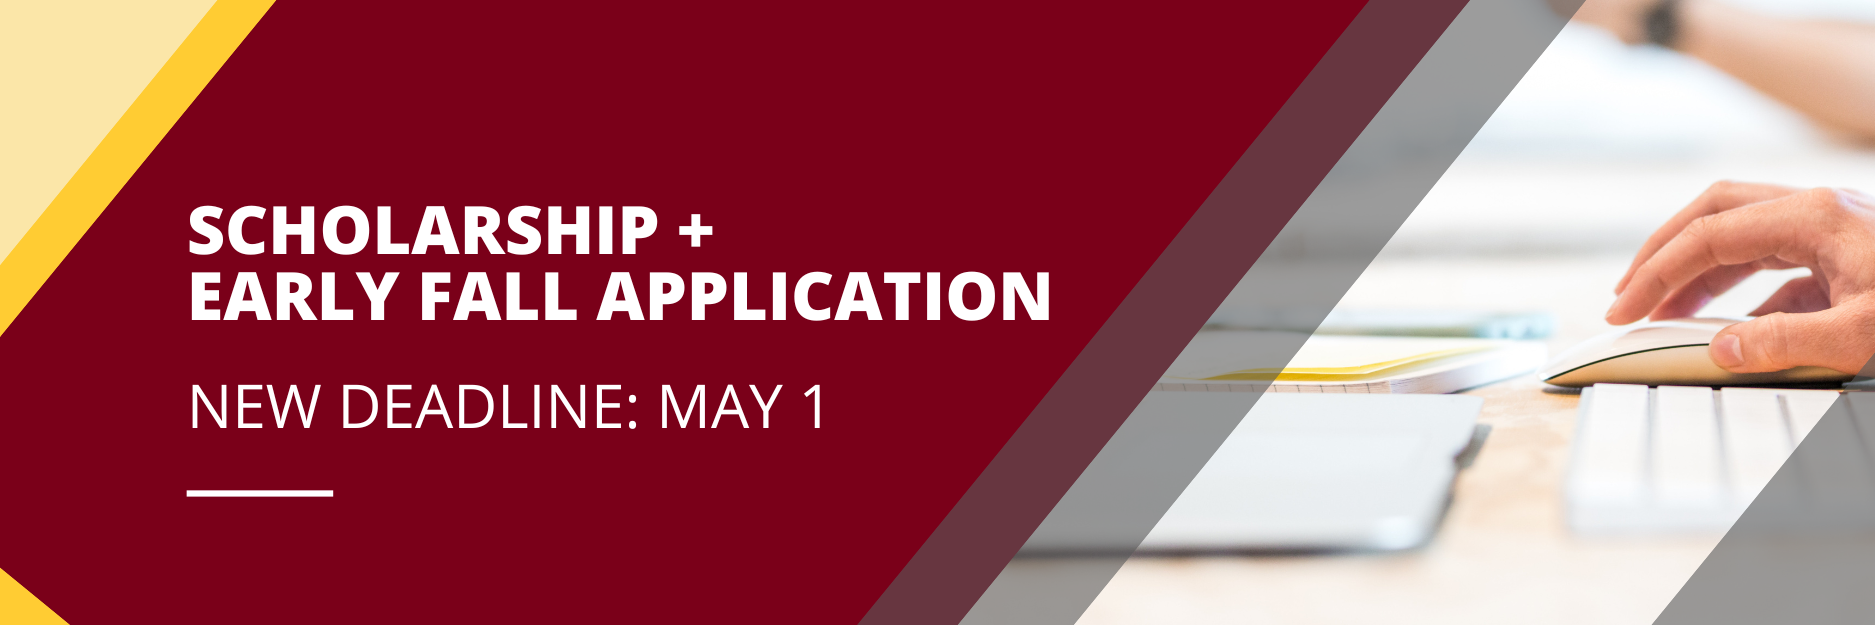 Scholarship and Early Fall Application  - New Deadline May 1